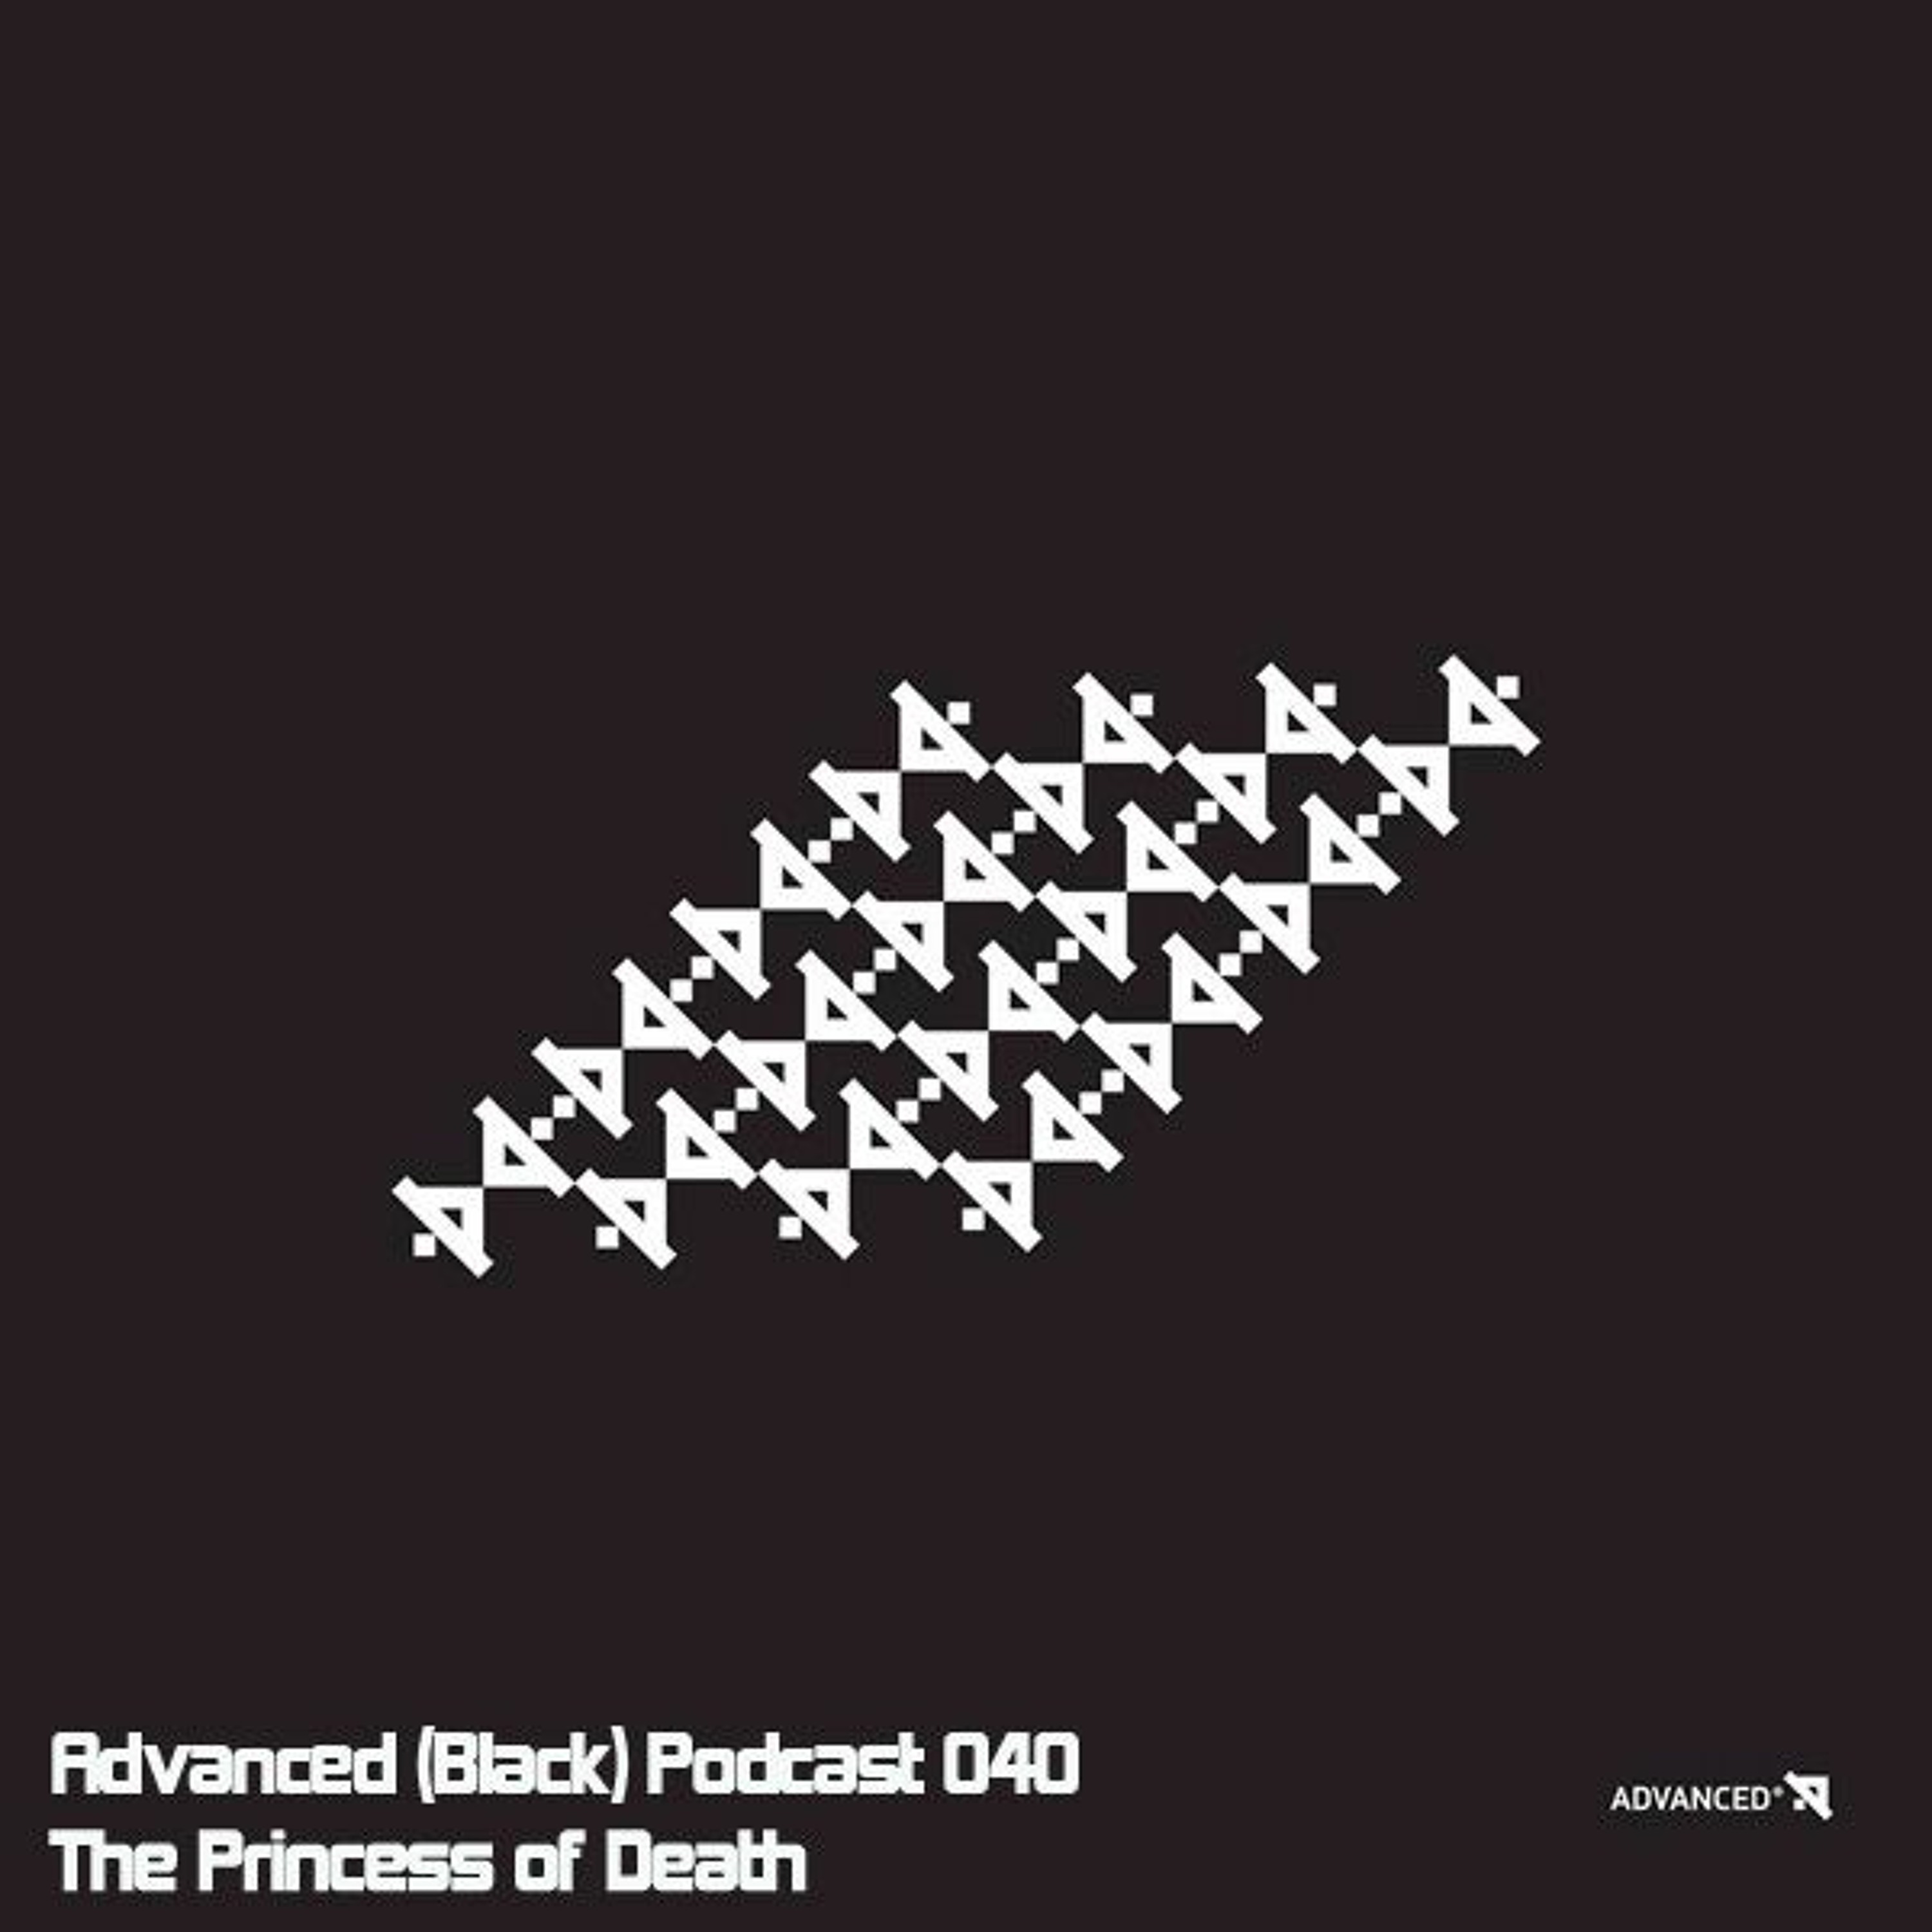 Advanced (Black) Podcast 040 with The Princess of Death